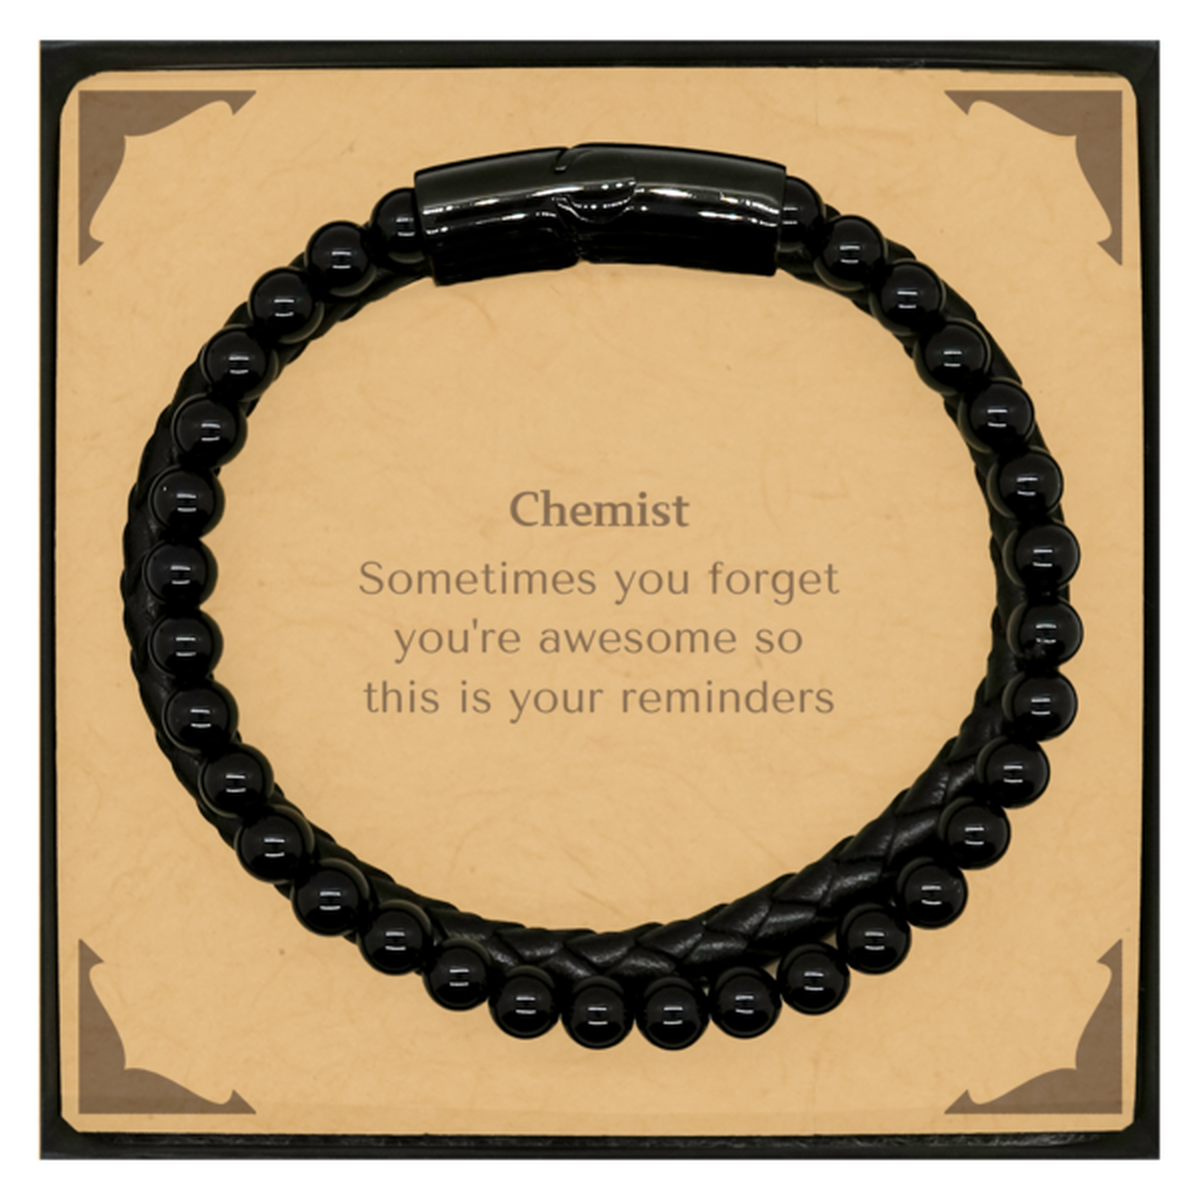 Sentimental Chemist Stone Leather Bracelets, Chemist Sometimes you forget you're awesome so this is your reminders, Graduation Christmas Birthday Gifts for Chemist, Men, Women, Coworkers